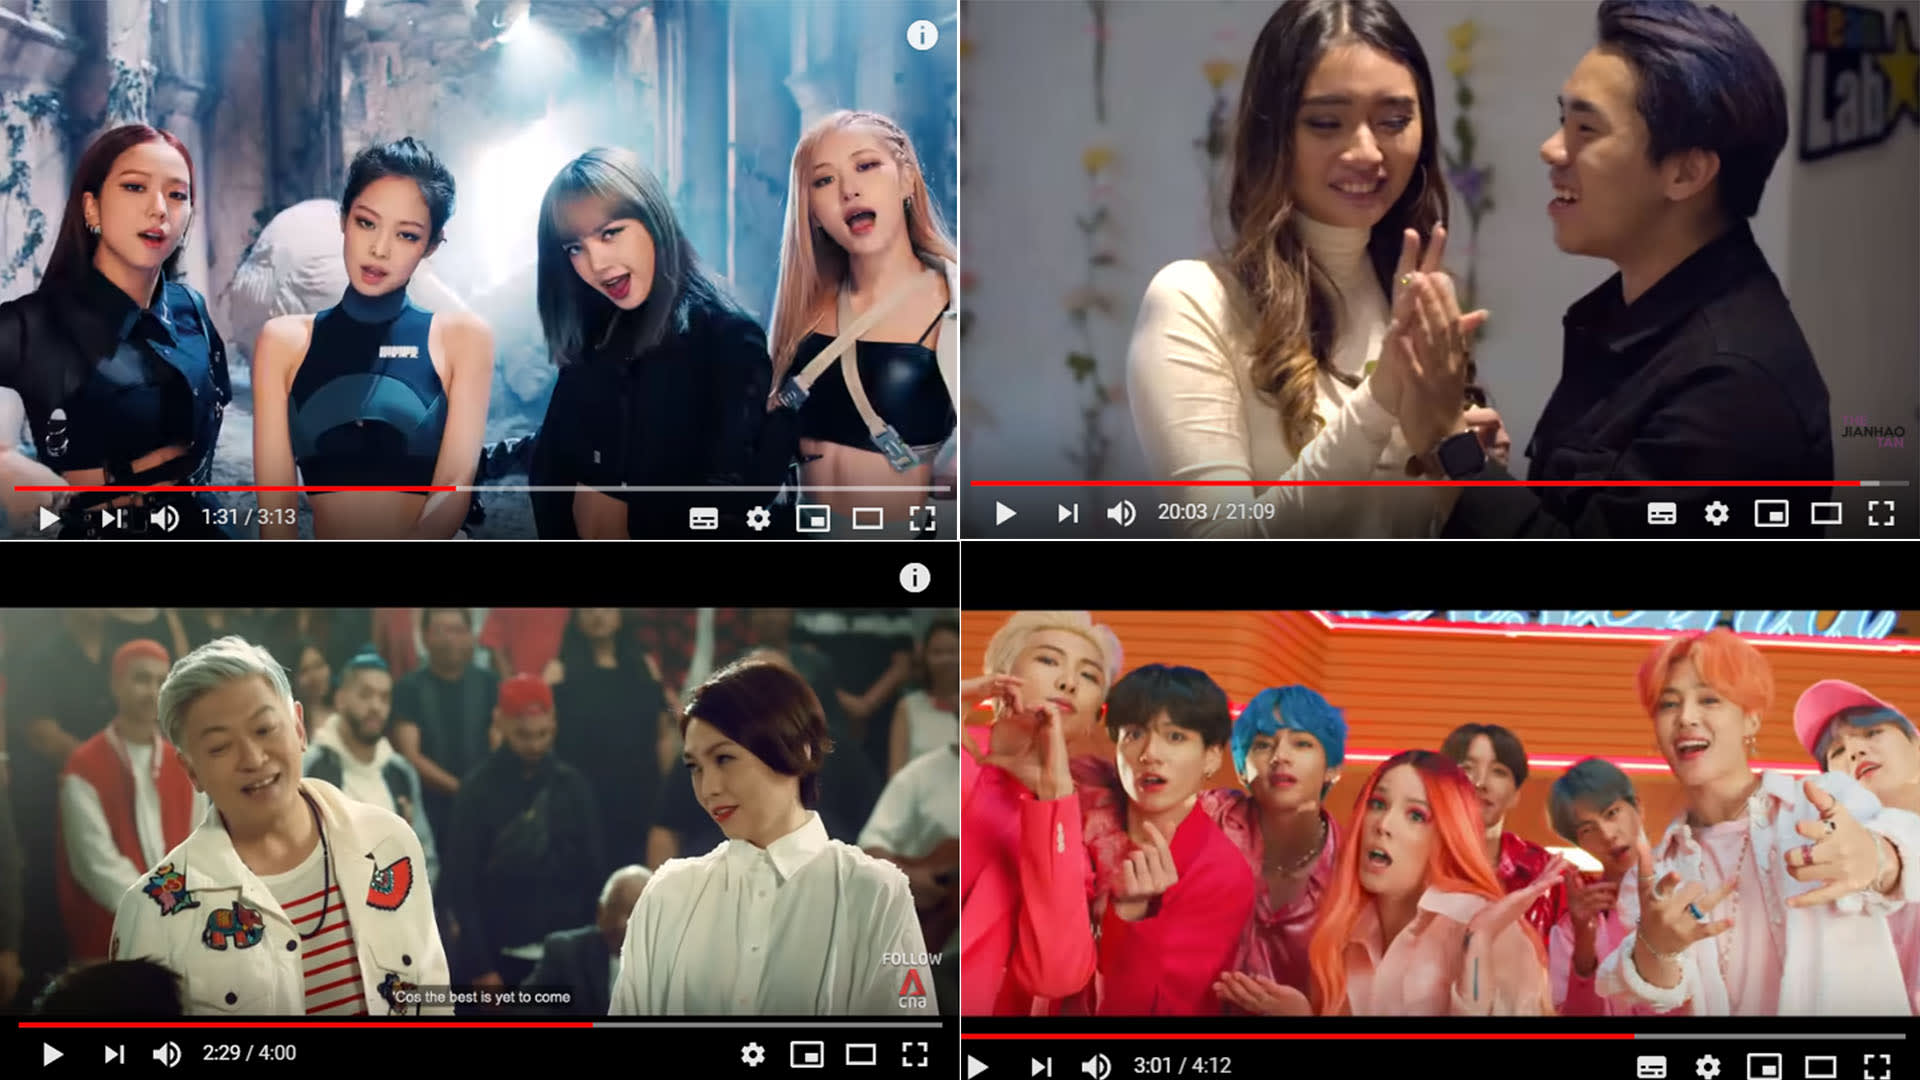 Singapore, These Are The Top 20 YouTube Videos You Watched In 2019